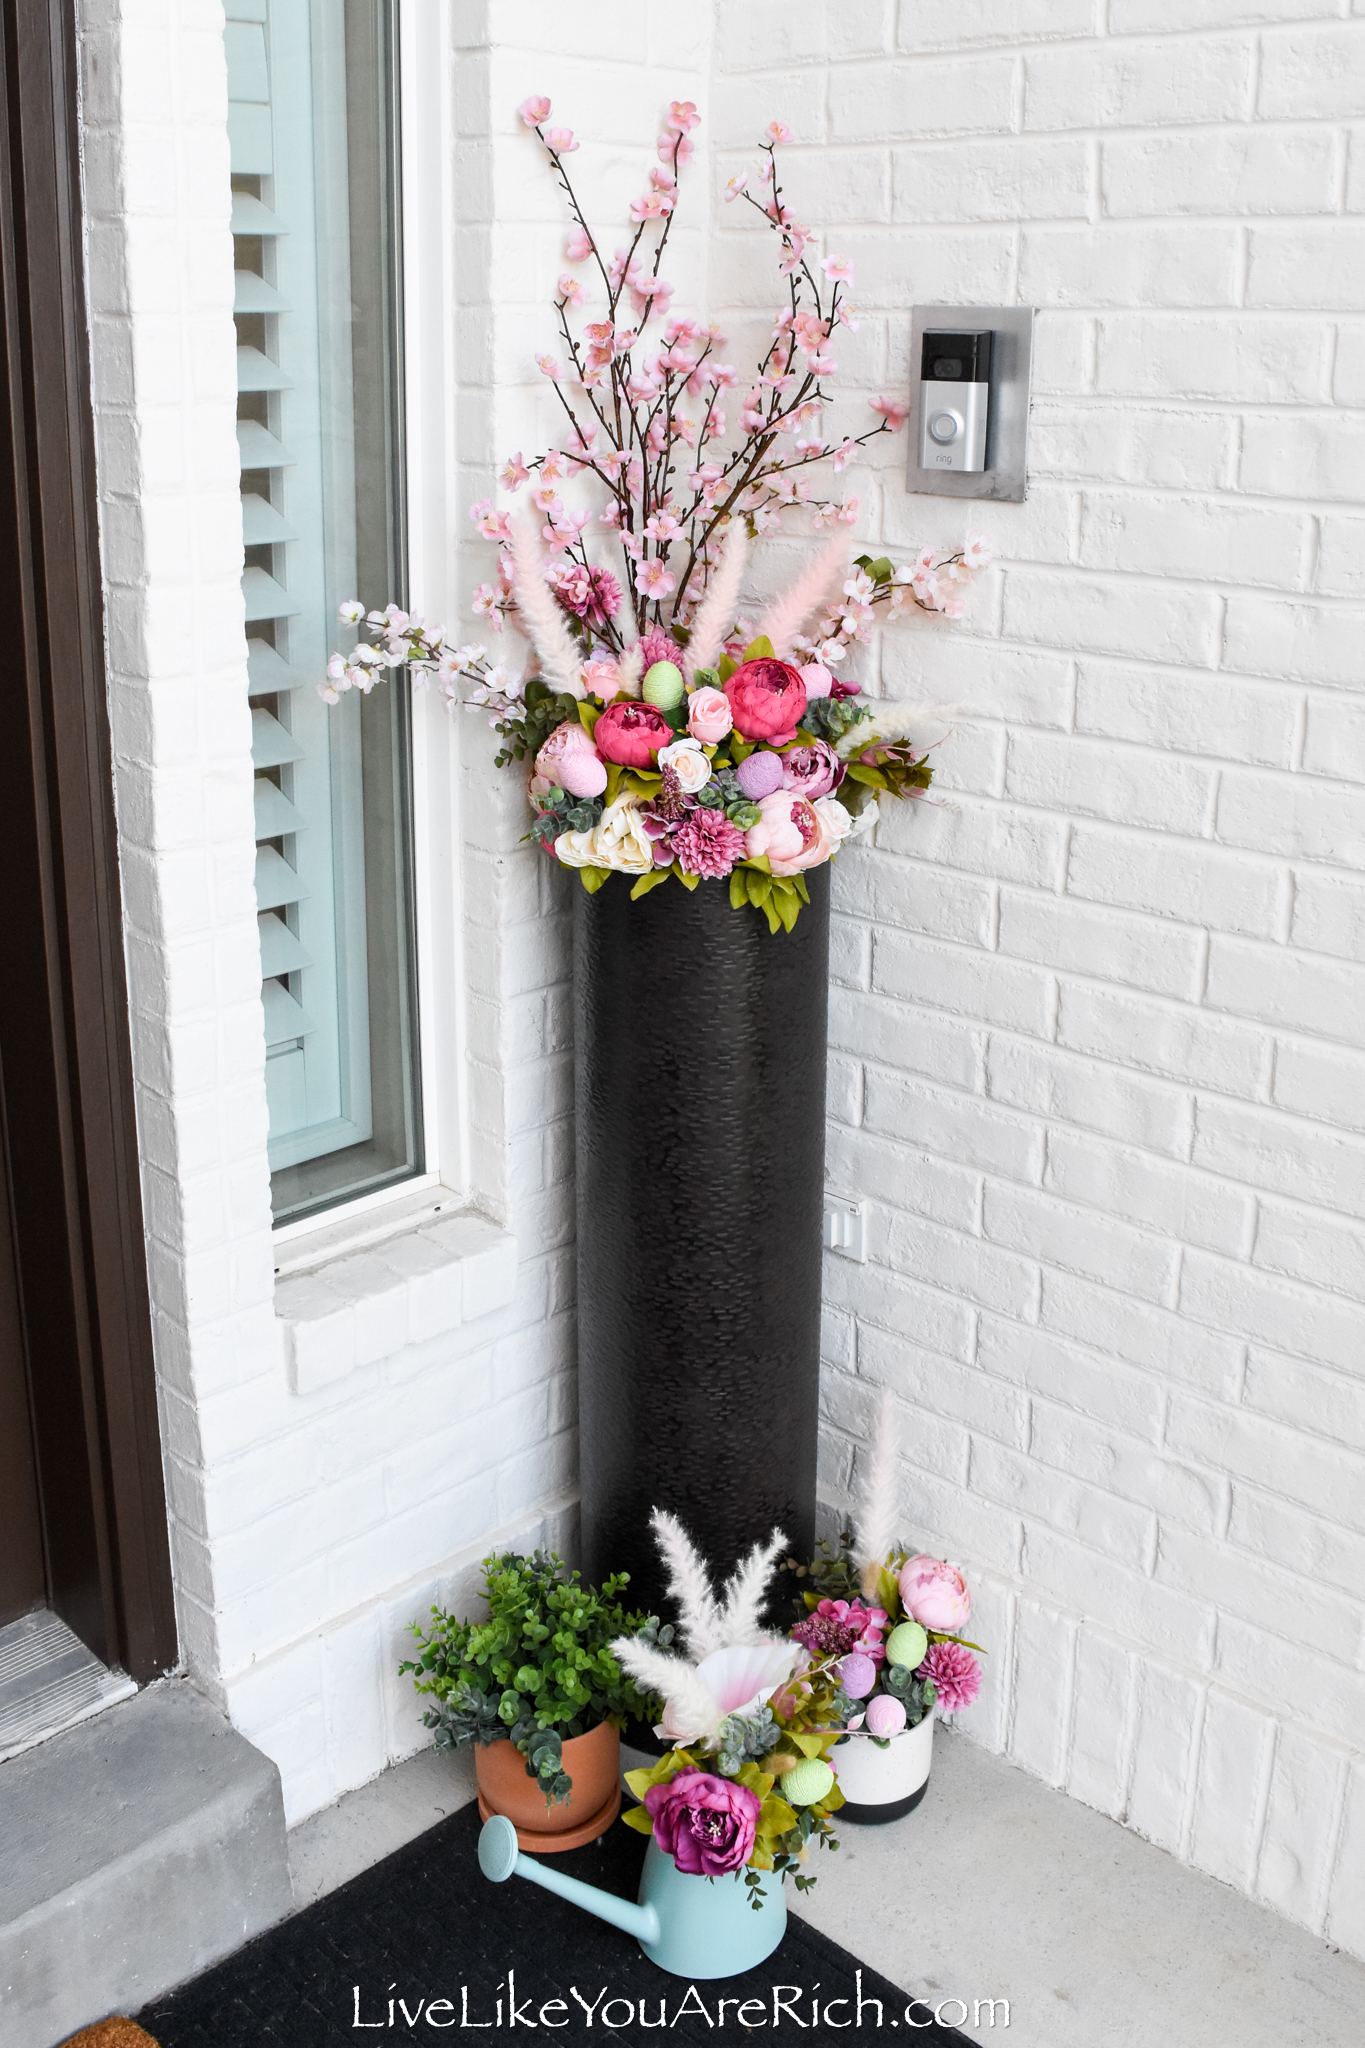 Used tall vase for the floral arrangement